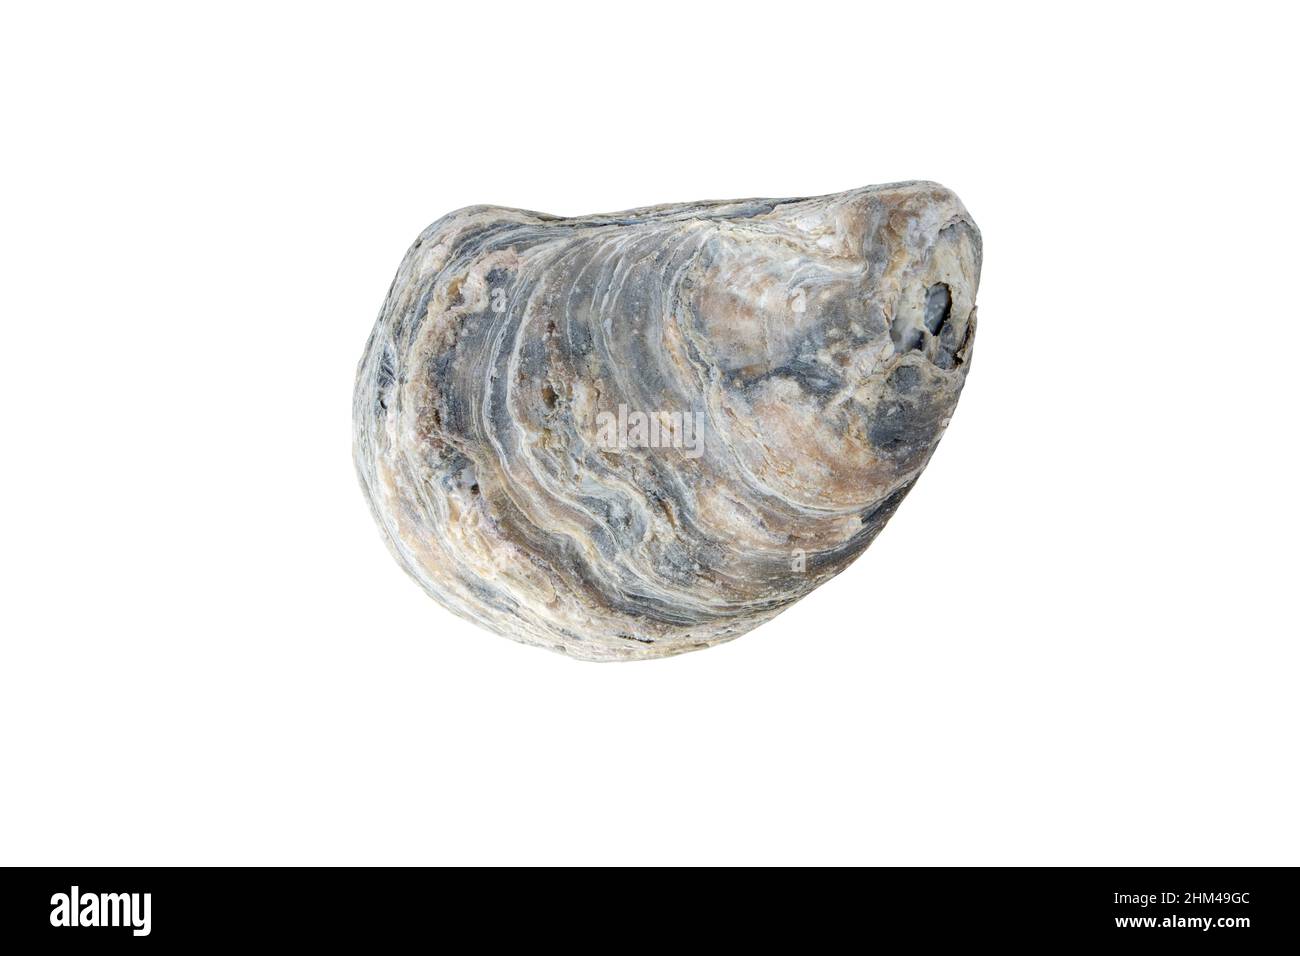 Oyster shell isolated on white. Mollusk seashell. Stock Photo